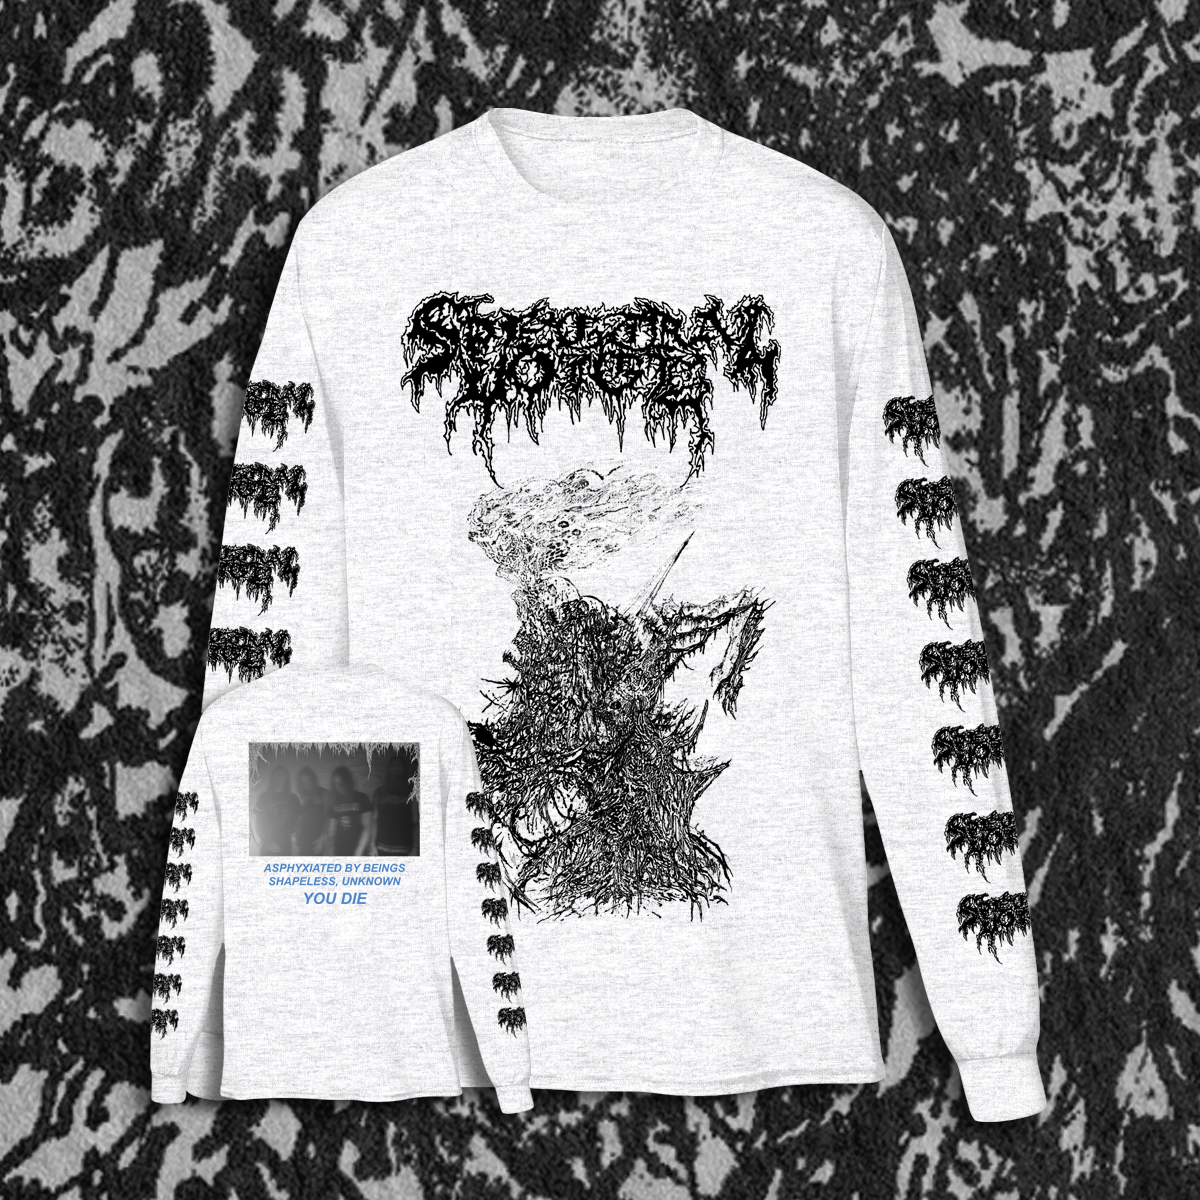 SPECTRAL VOICE "ASPHYXIATED" LONG SLEEVE SHIRT (PRE-ORDER)